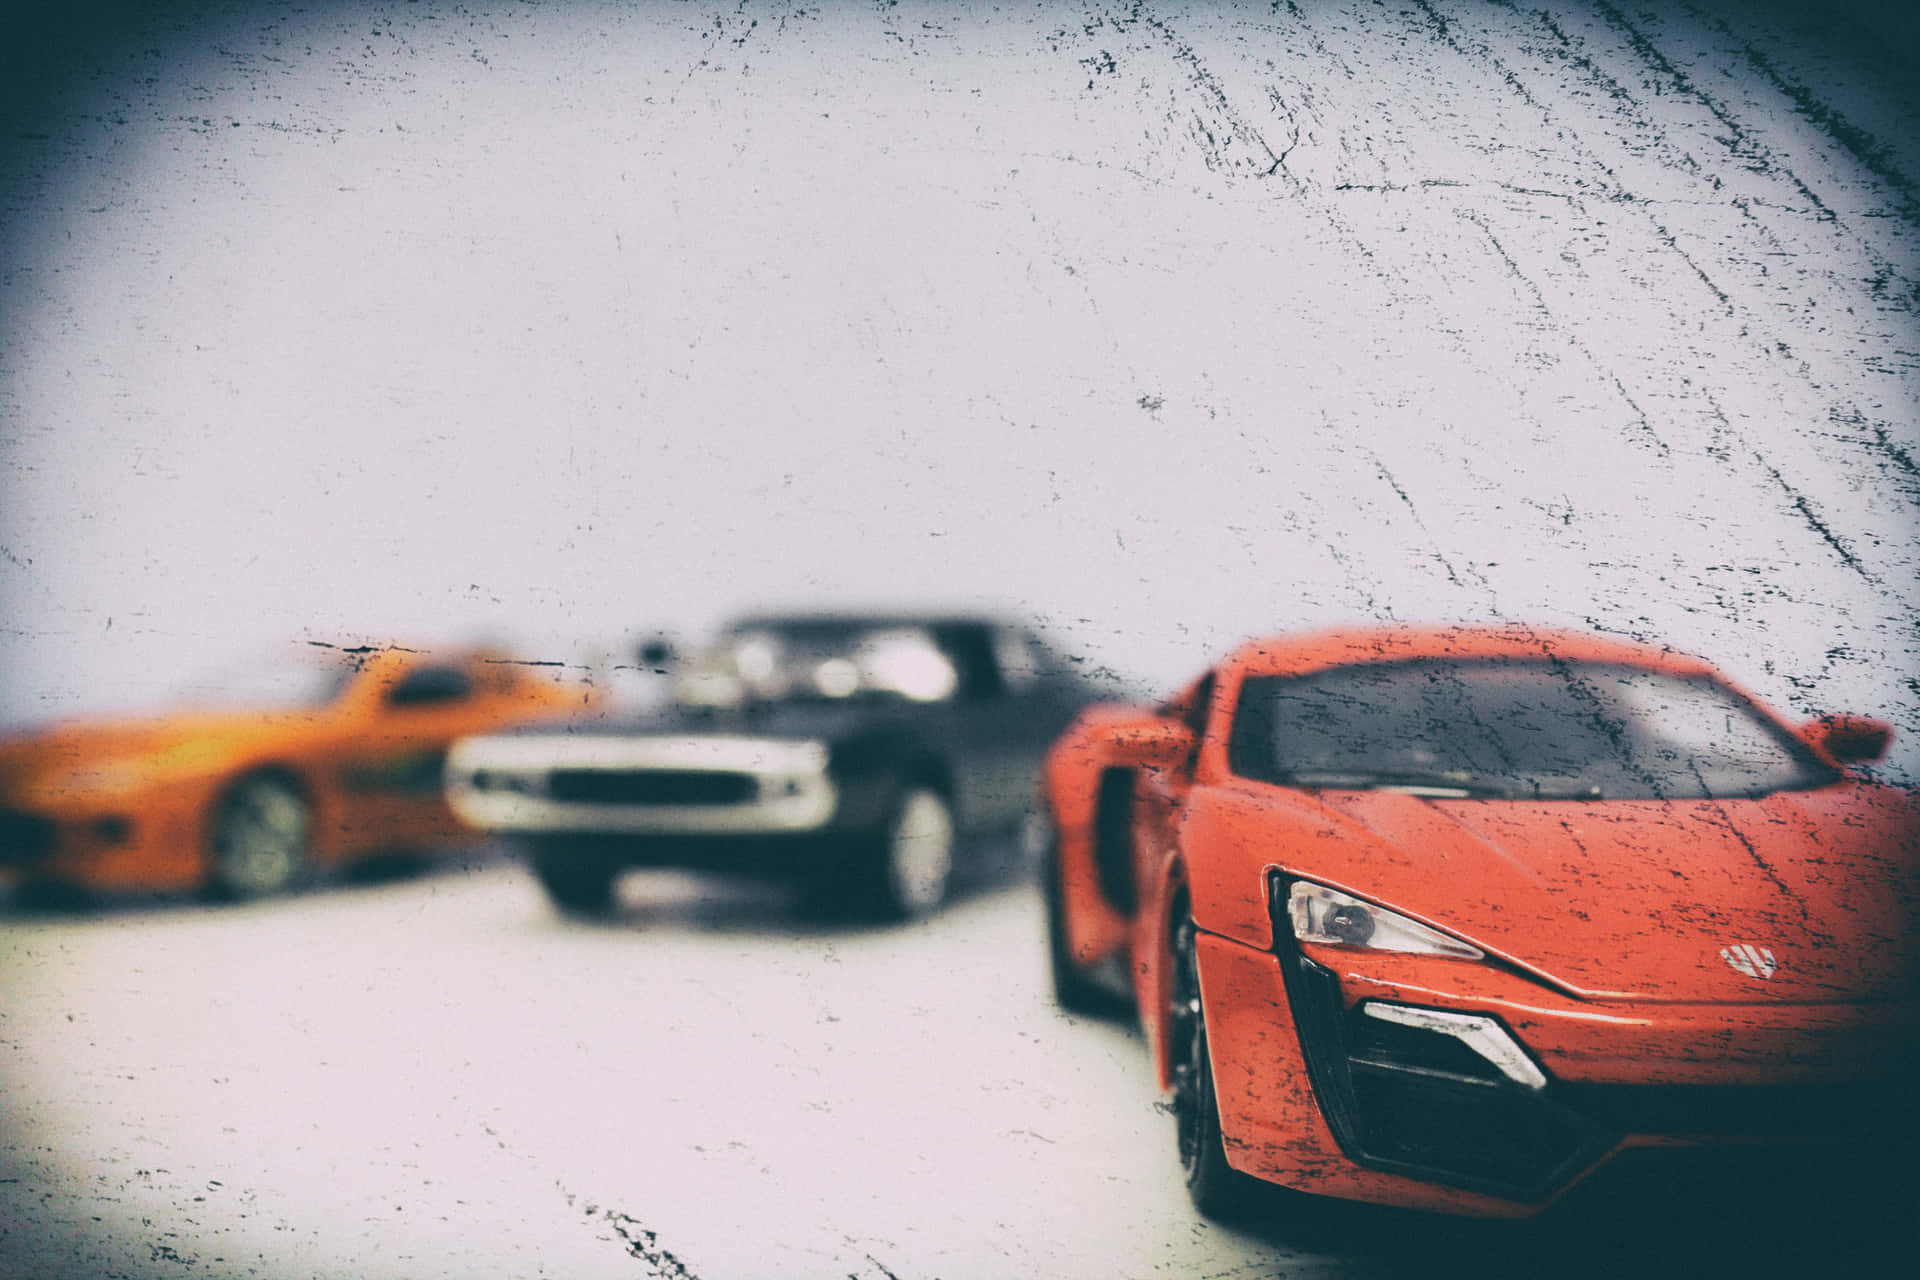 Trio of Speed - Quick Cars in High Gear Wallpaper